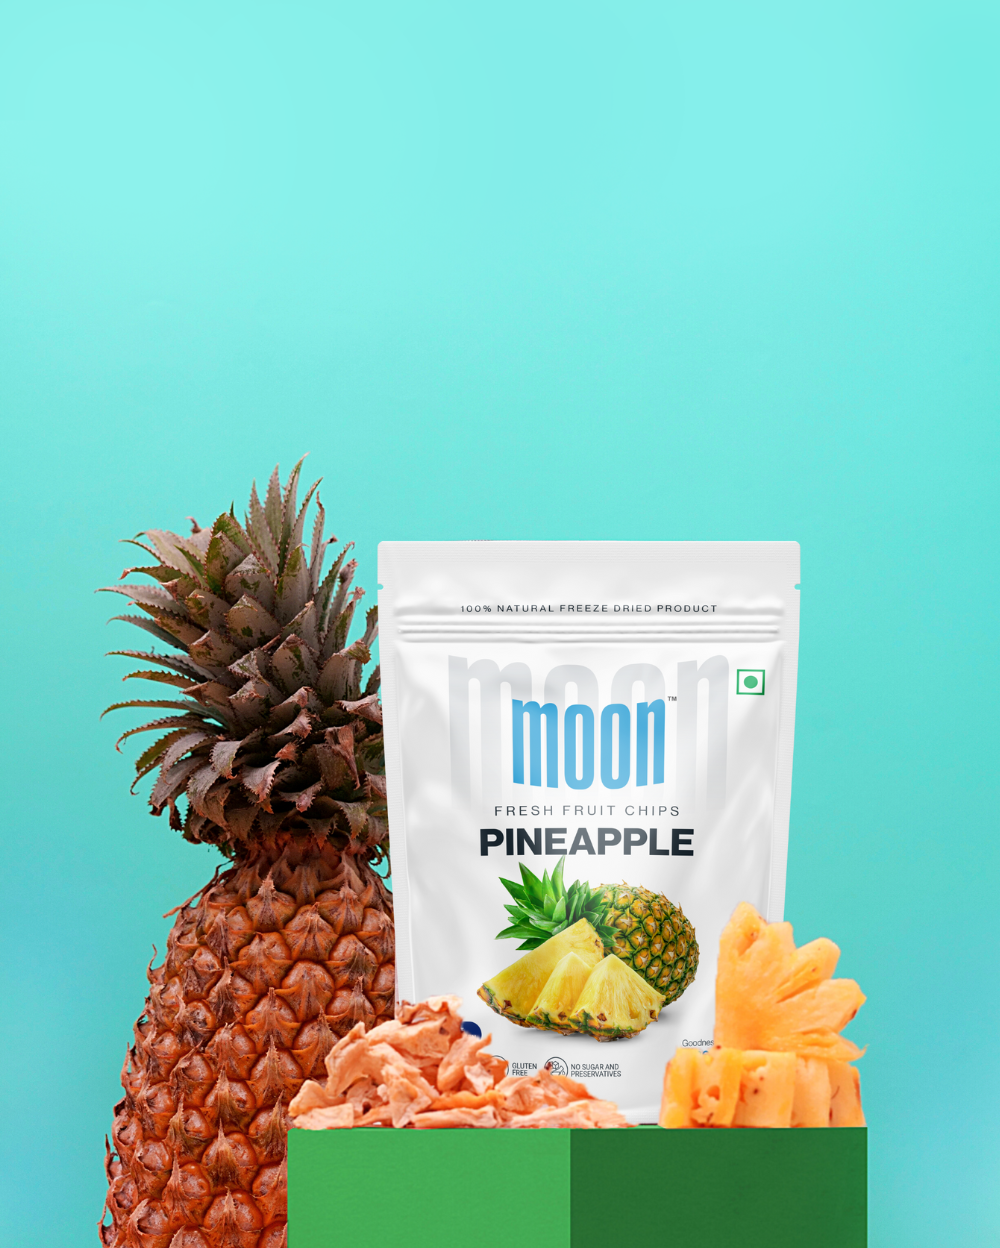 A package of Moon Freeze Dried Banana + Pineapple chips displayed with a fresh pineapple and pineapple slices against a teal background.